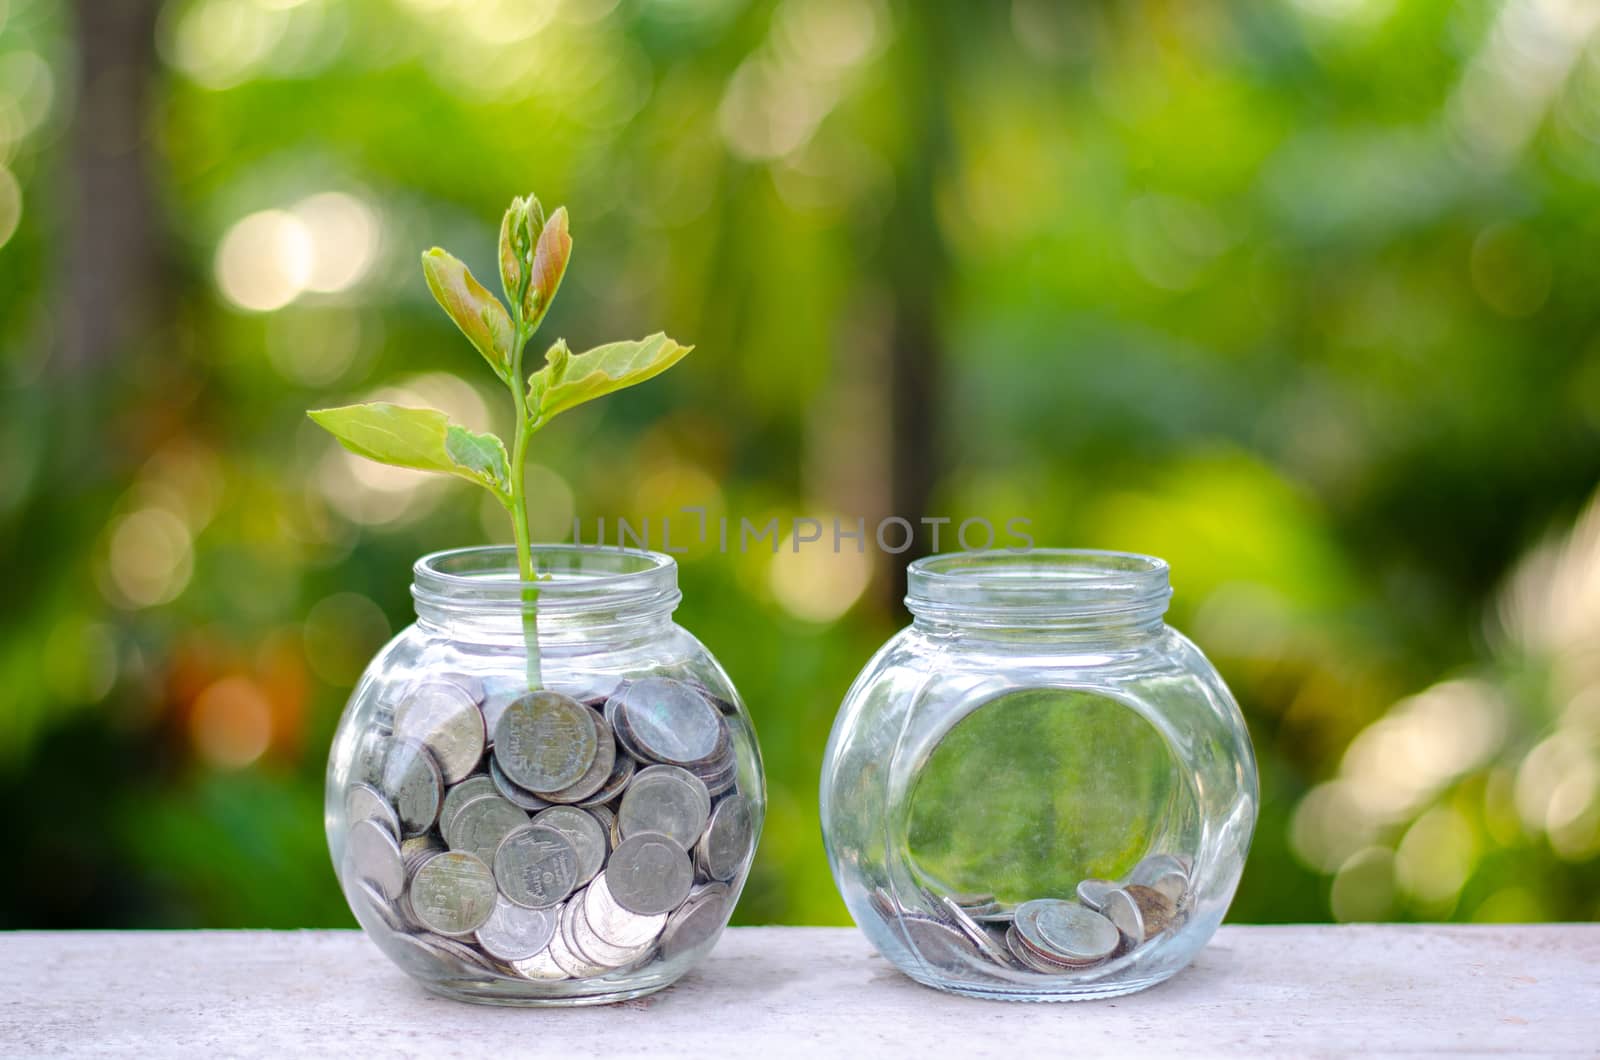 Coin tree Glass Jar Plant growing from coins outside the glass jar on blurred green natural background money saving and investment financial concept